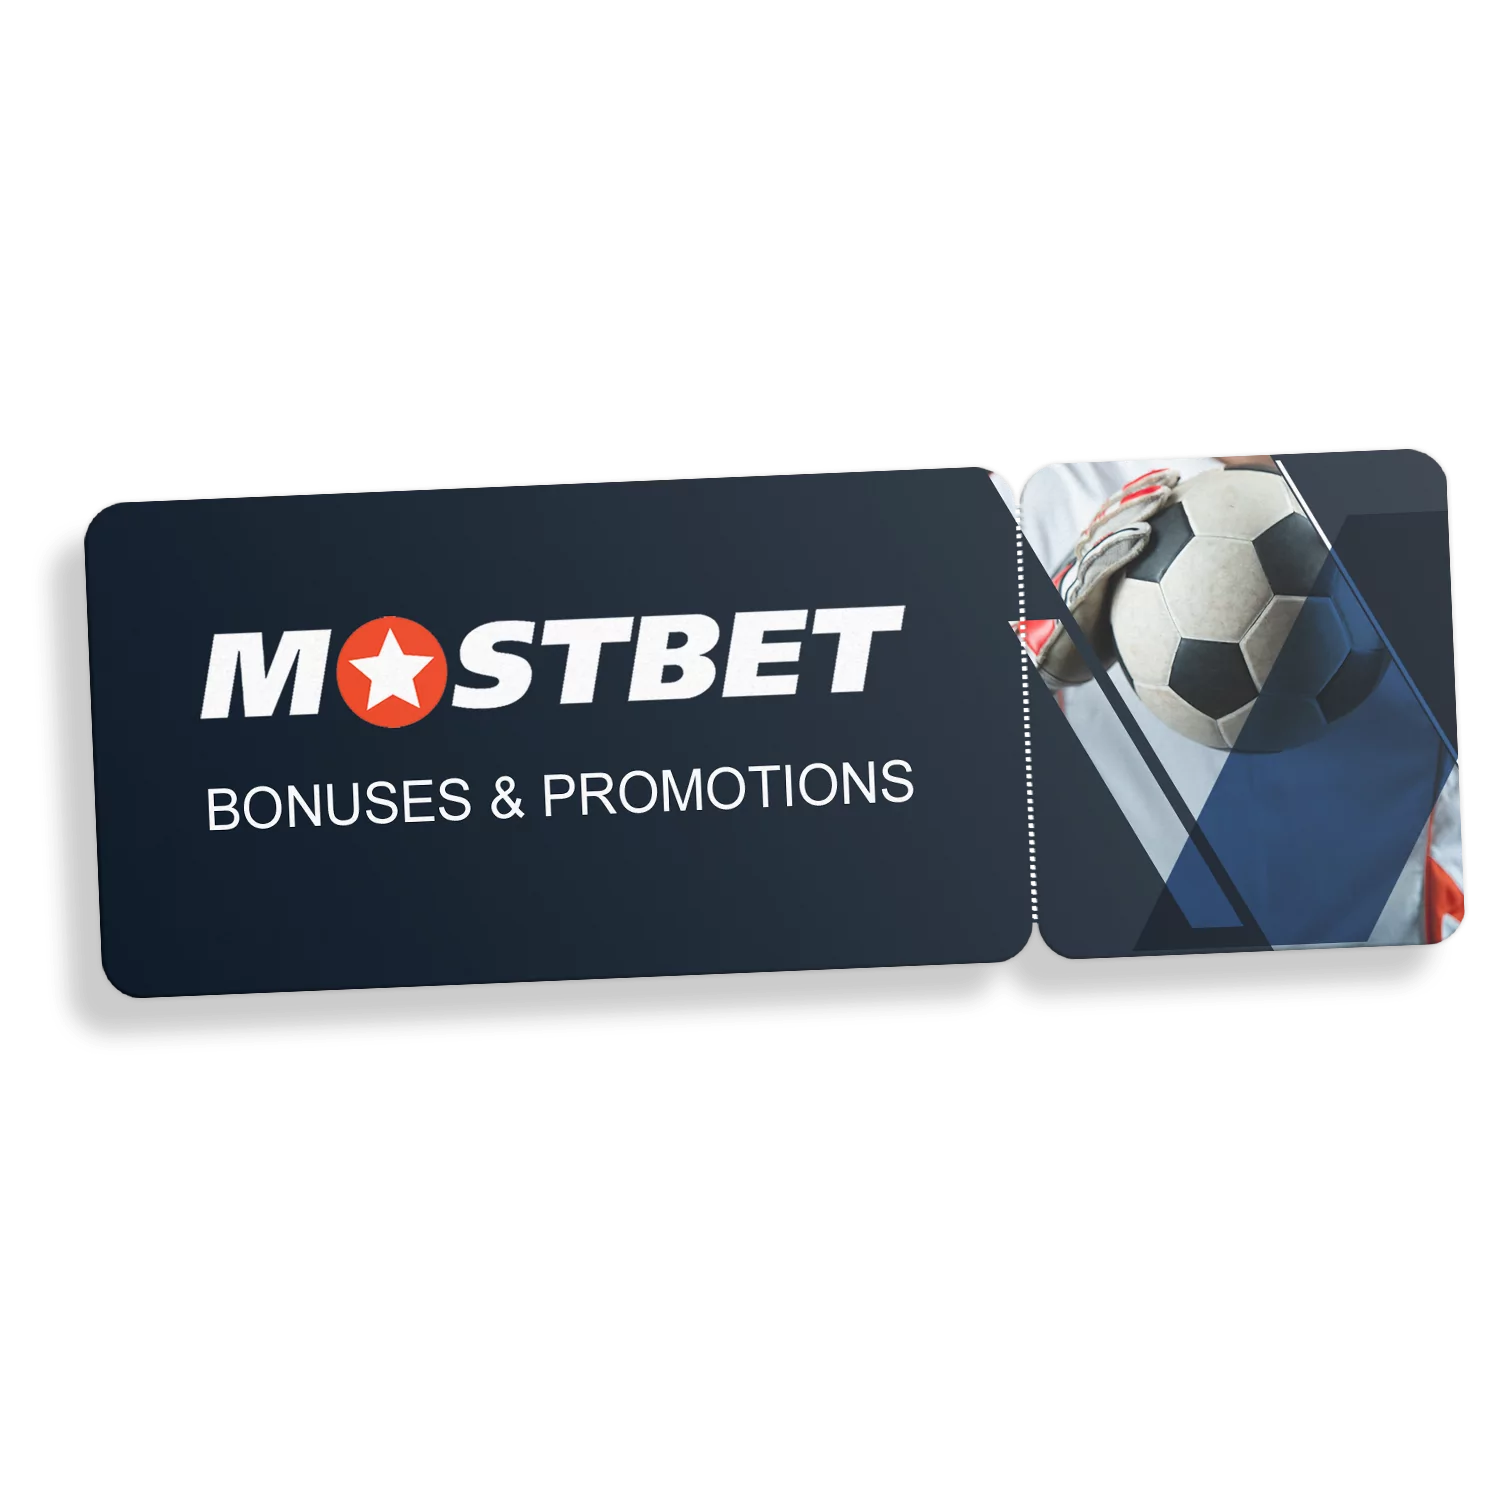 Mostbet-AZ90 Bookmaker and Casino in Azerbaijan For Sale – How Much Is Yours Worth?